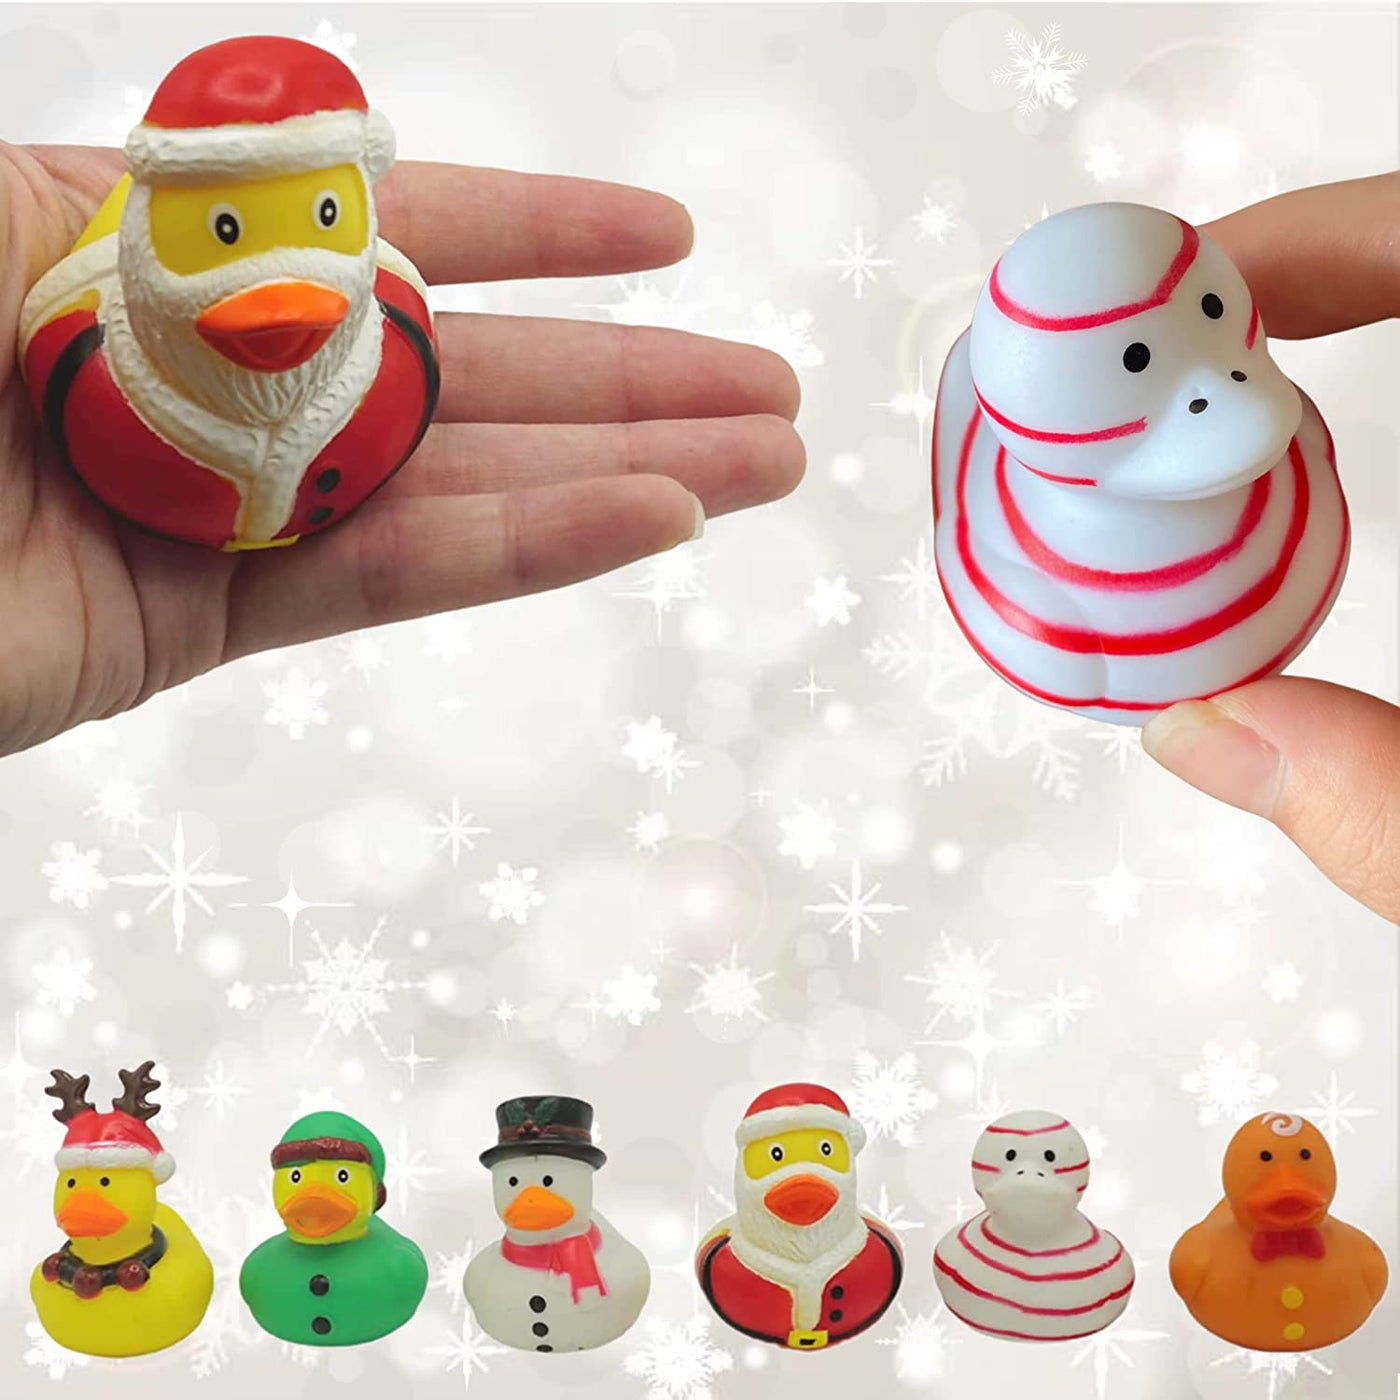 Christmas Rubber Ducks Bulk (24 Pack) Holiday Themed Rubber Duckies 2.5" - for Kids Party Favors, Bath Toys, Jeep Ducking, Bulk Gifts for Classroom by 4E's Novelty